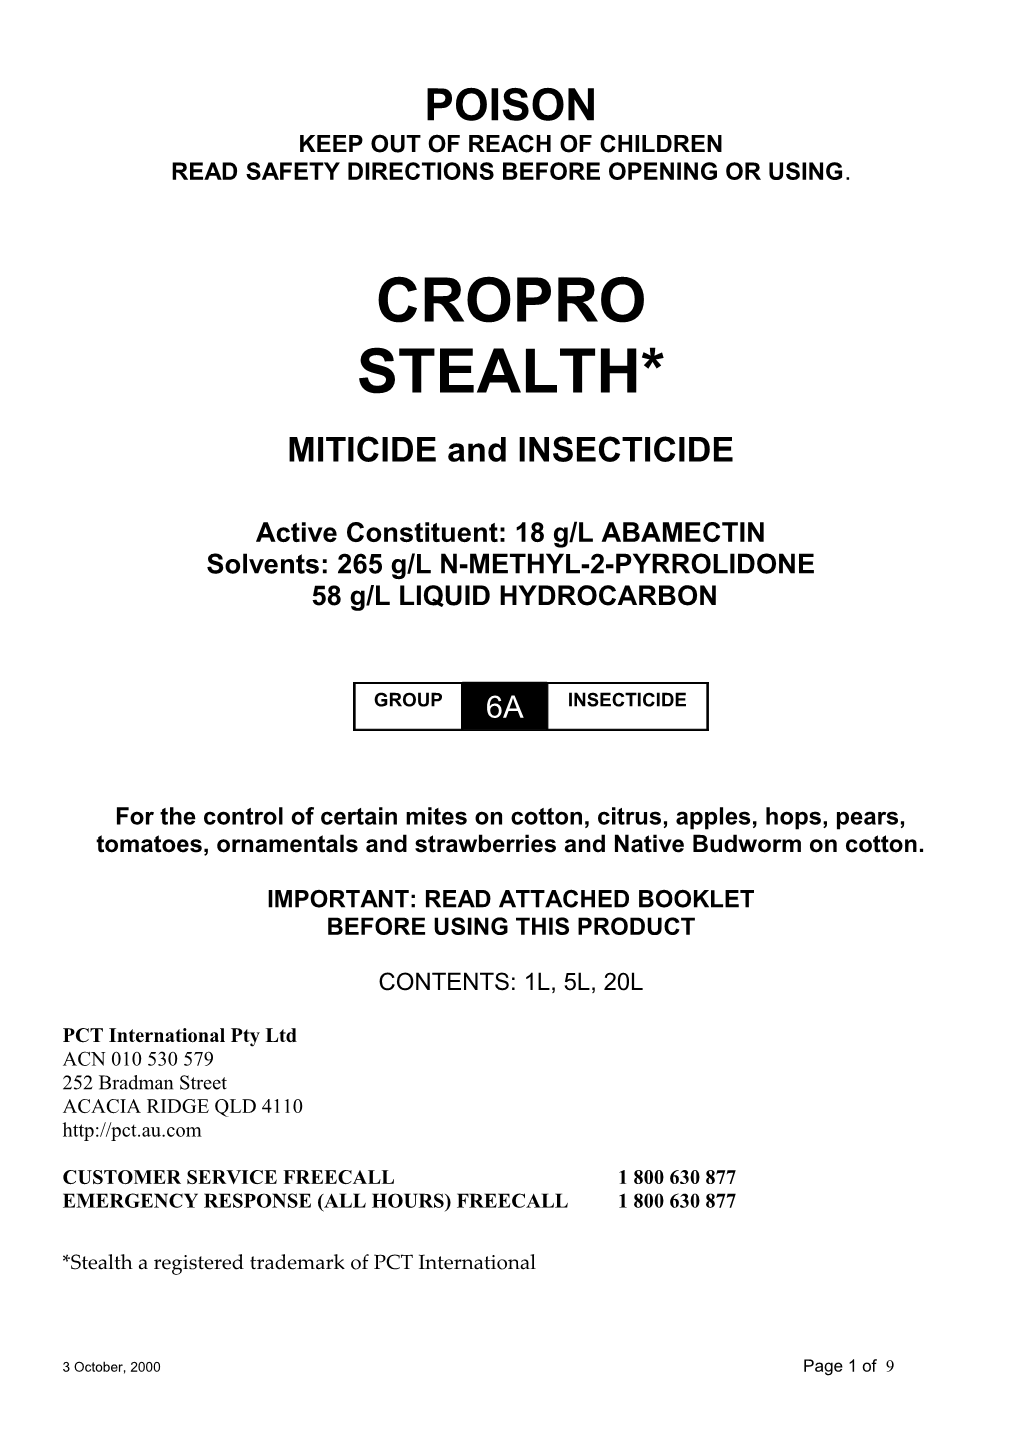 Cropro Stealth Miticide and Insecticide Label